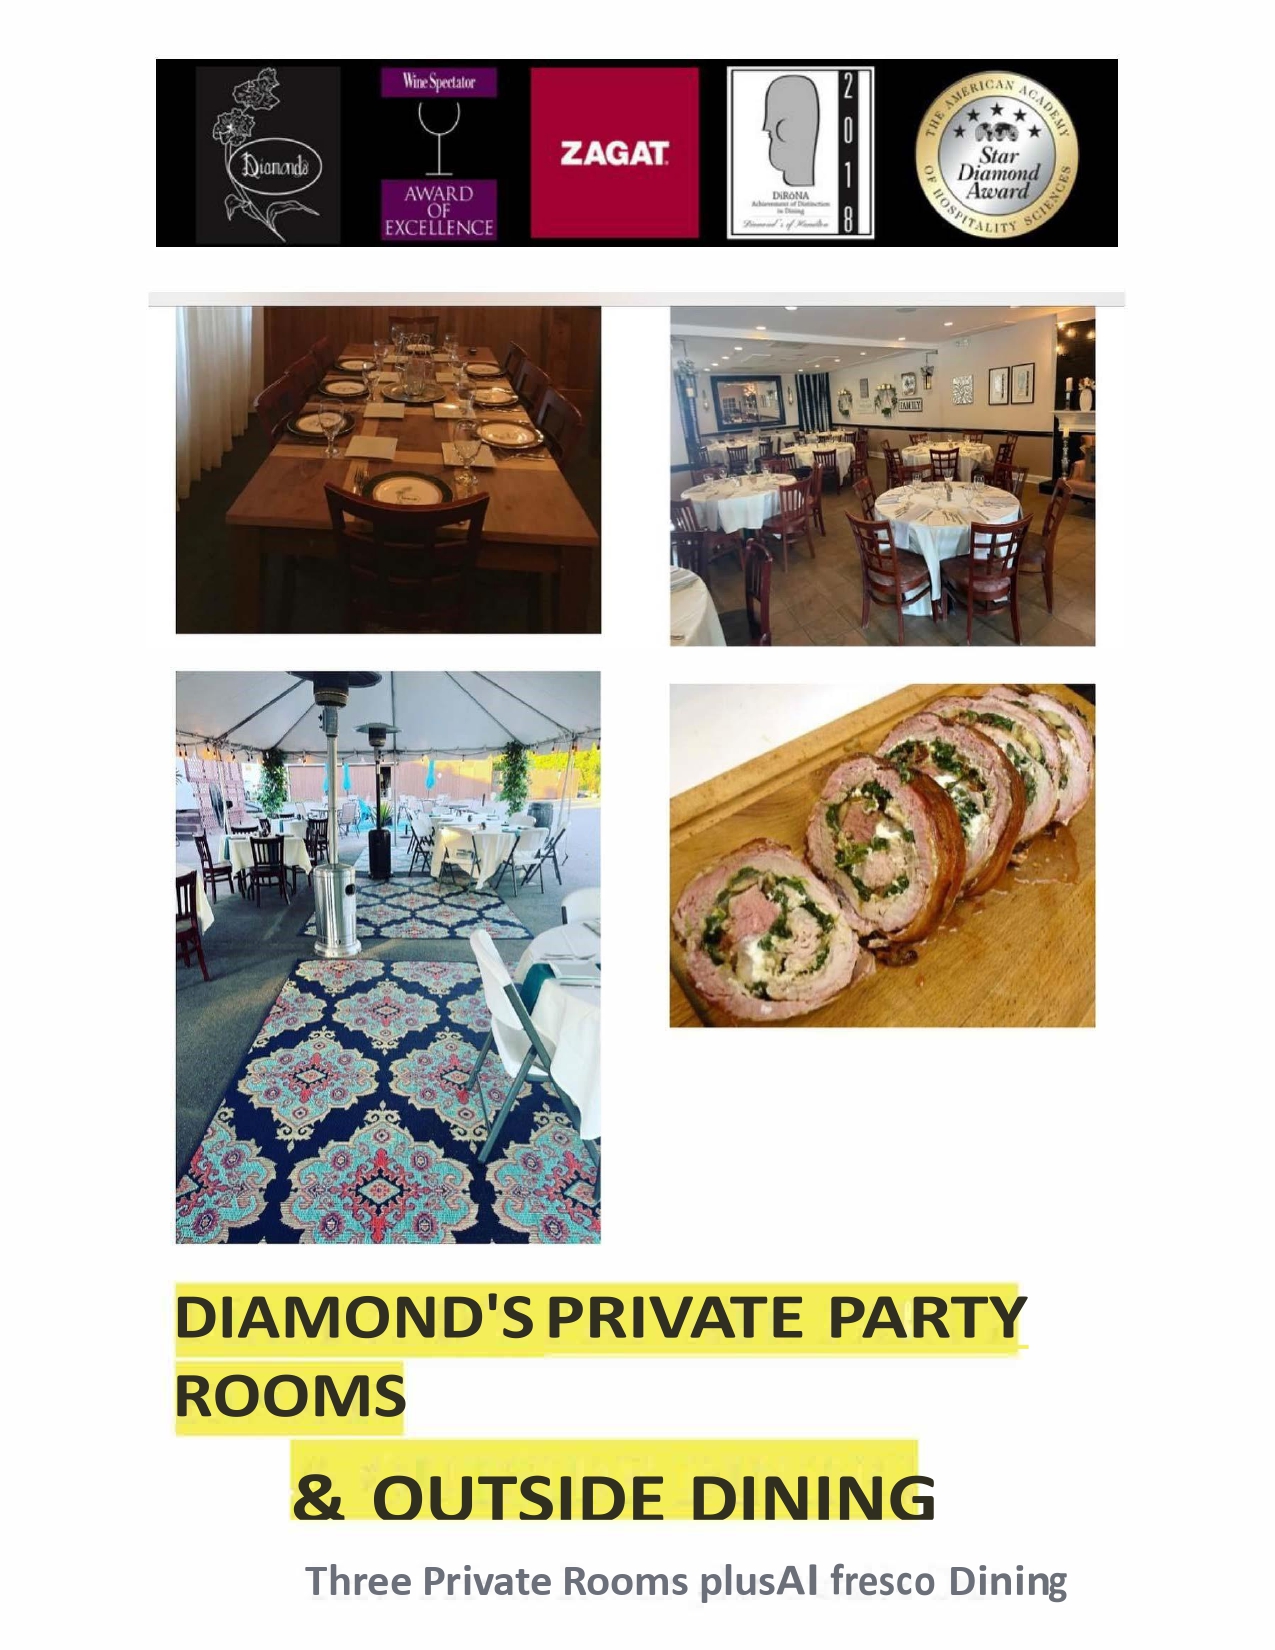 Advertisement for diamond's restaurant featuring images of private dining rooms, patio dining area, and a dish of sushi, along with multiple award logos.